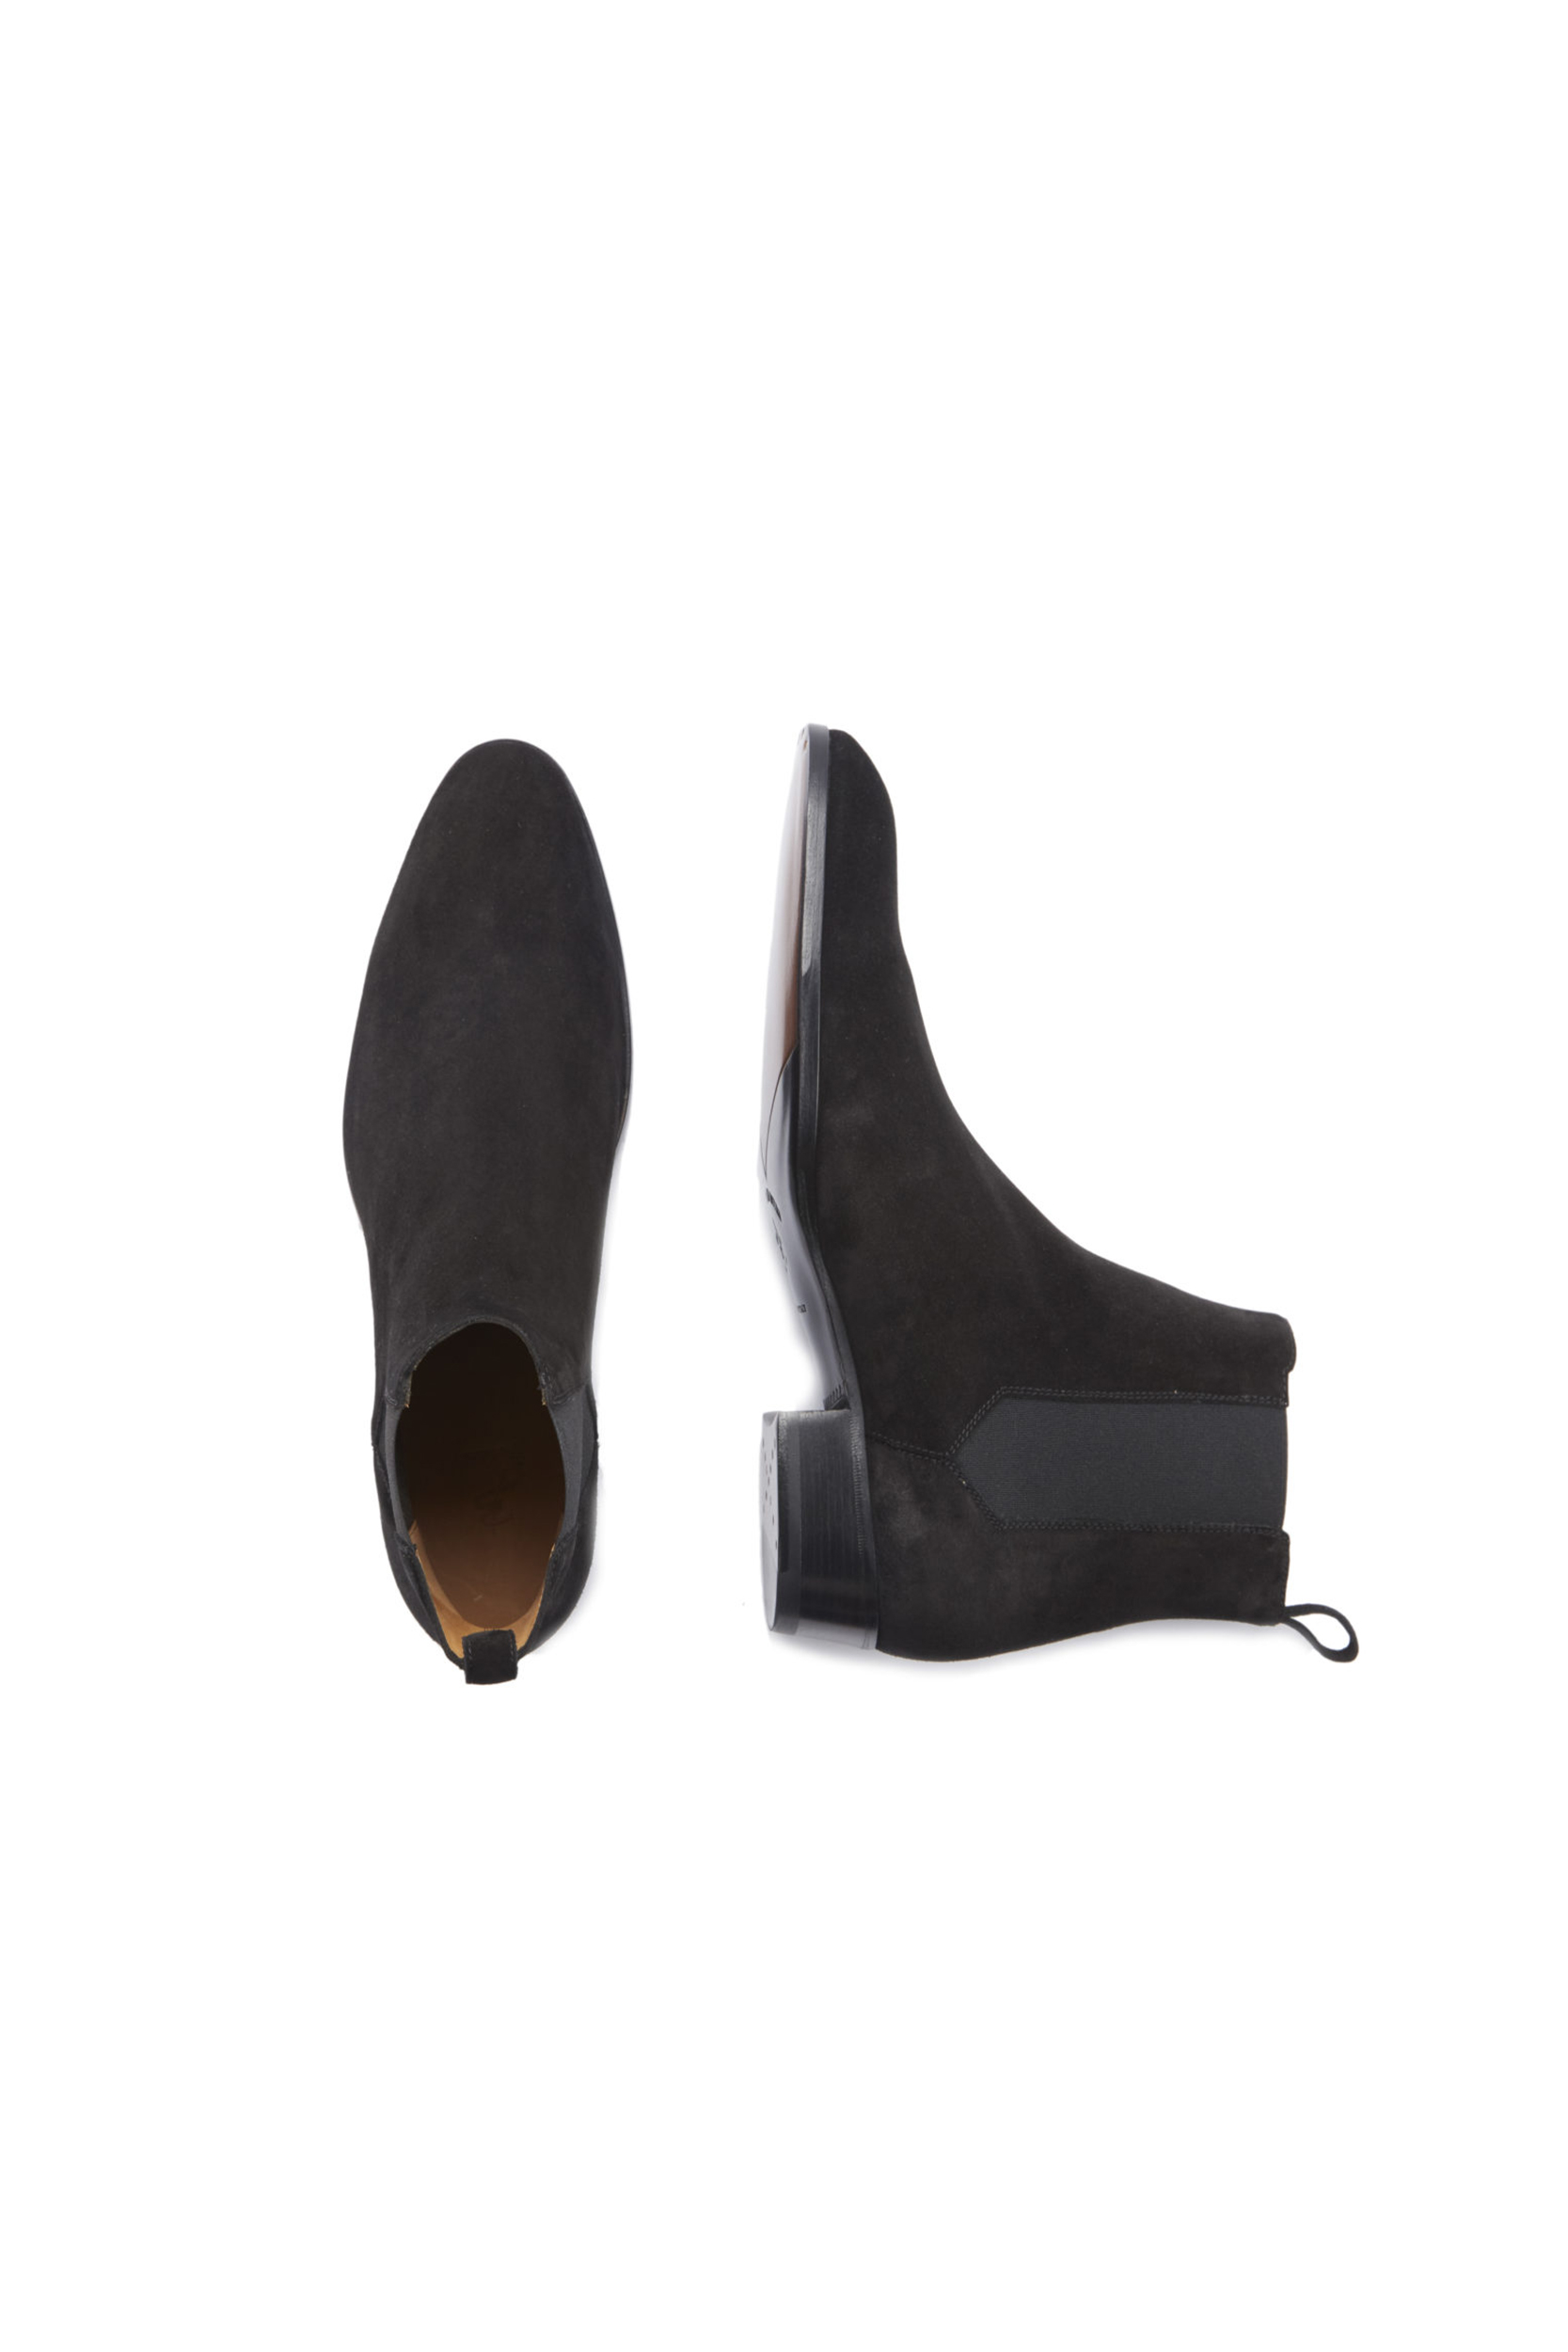 Stendhal Black Suede Chelsea Boots - Barbanera